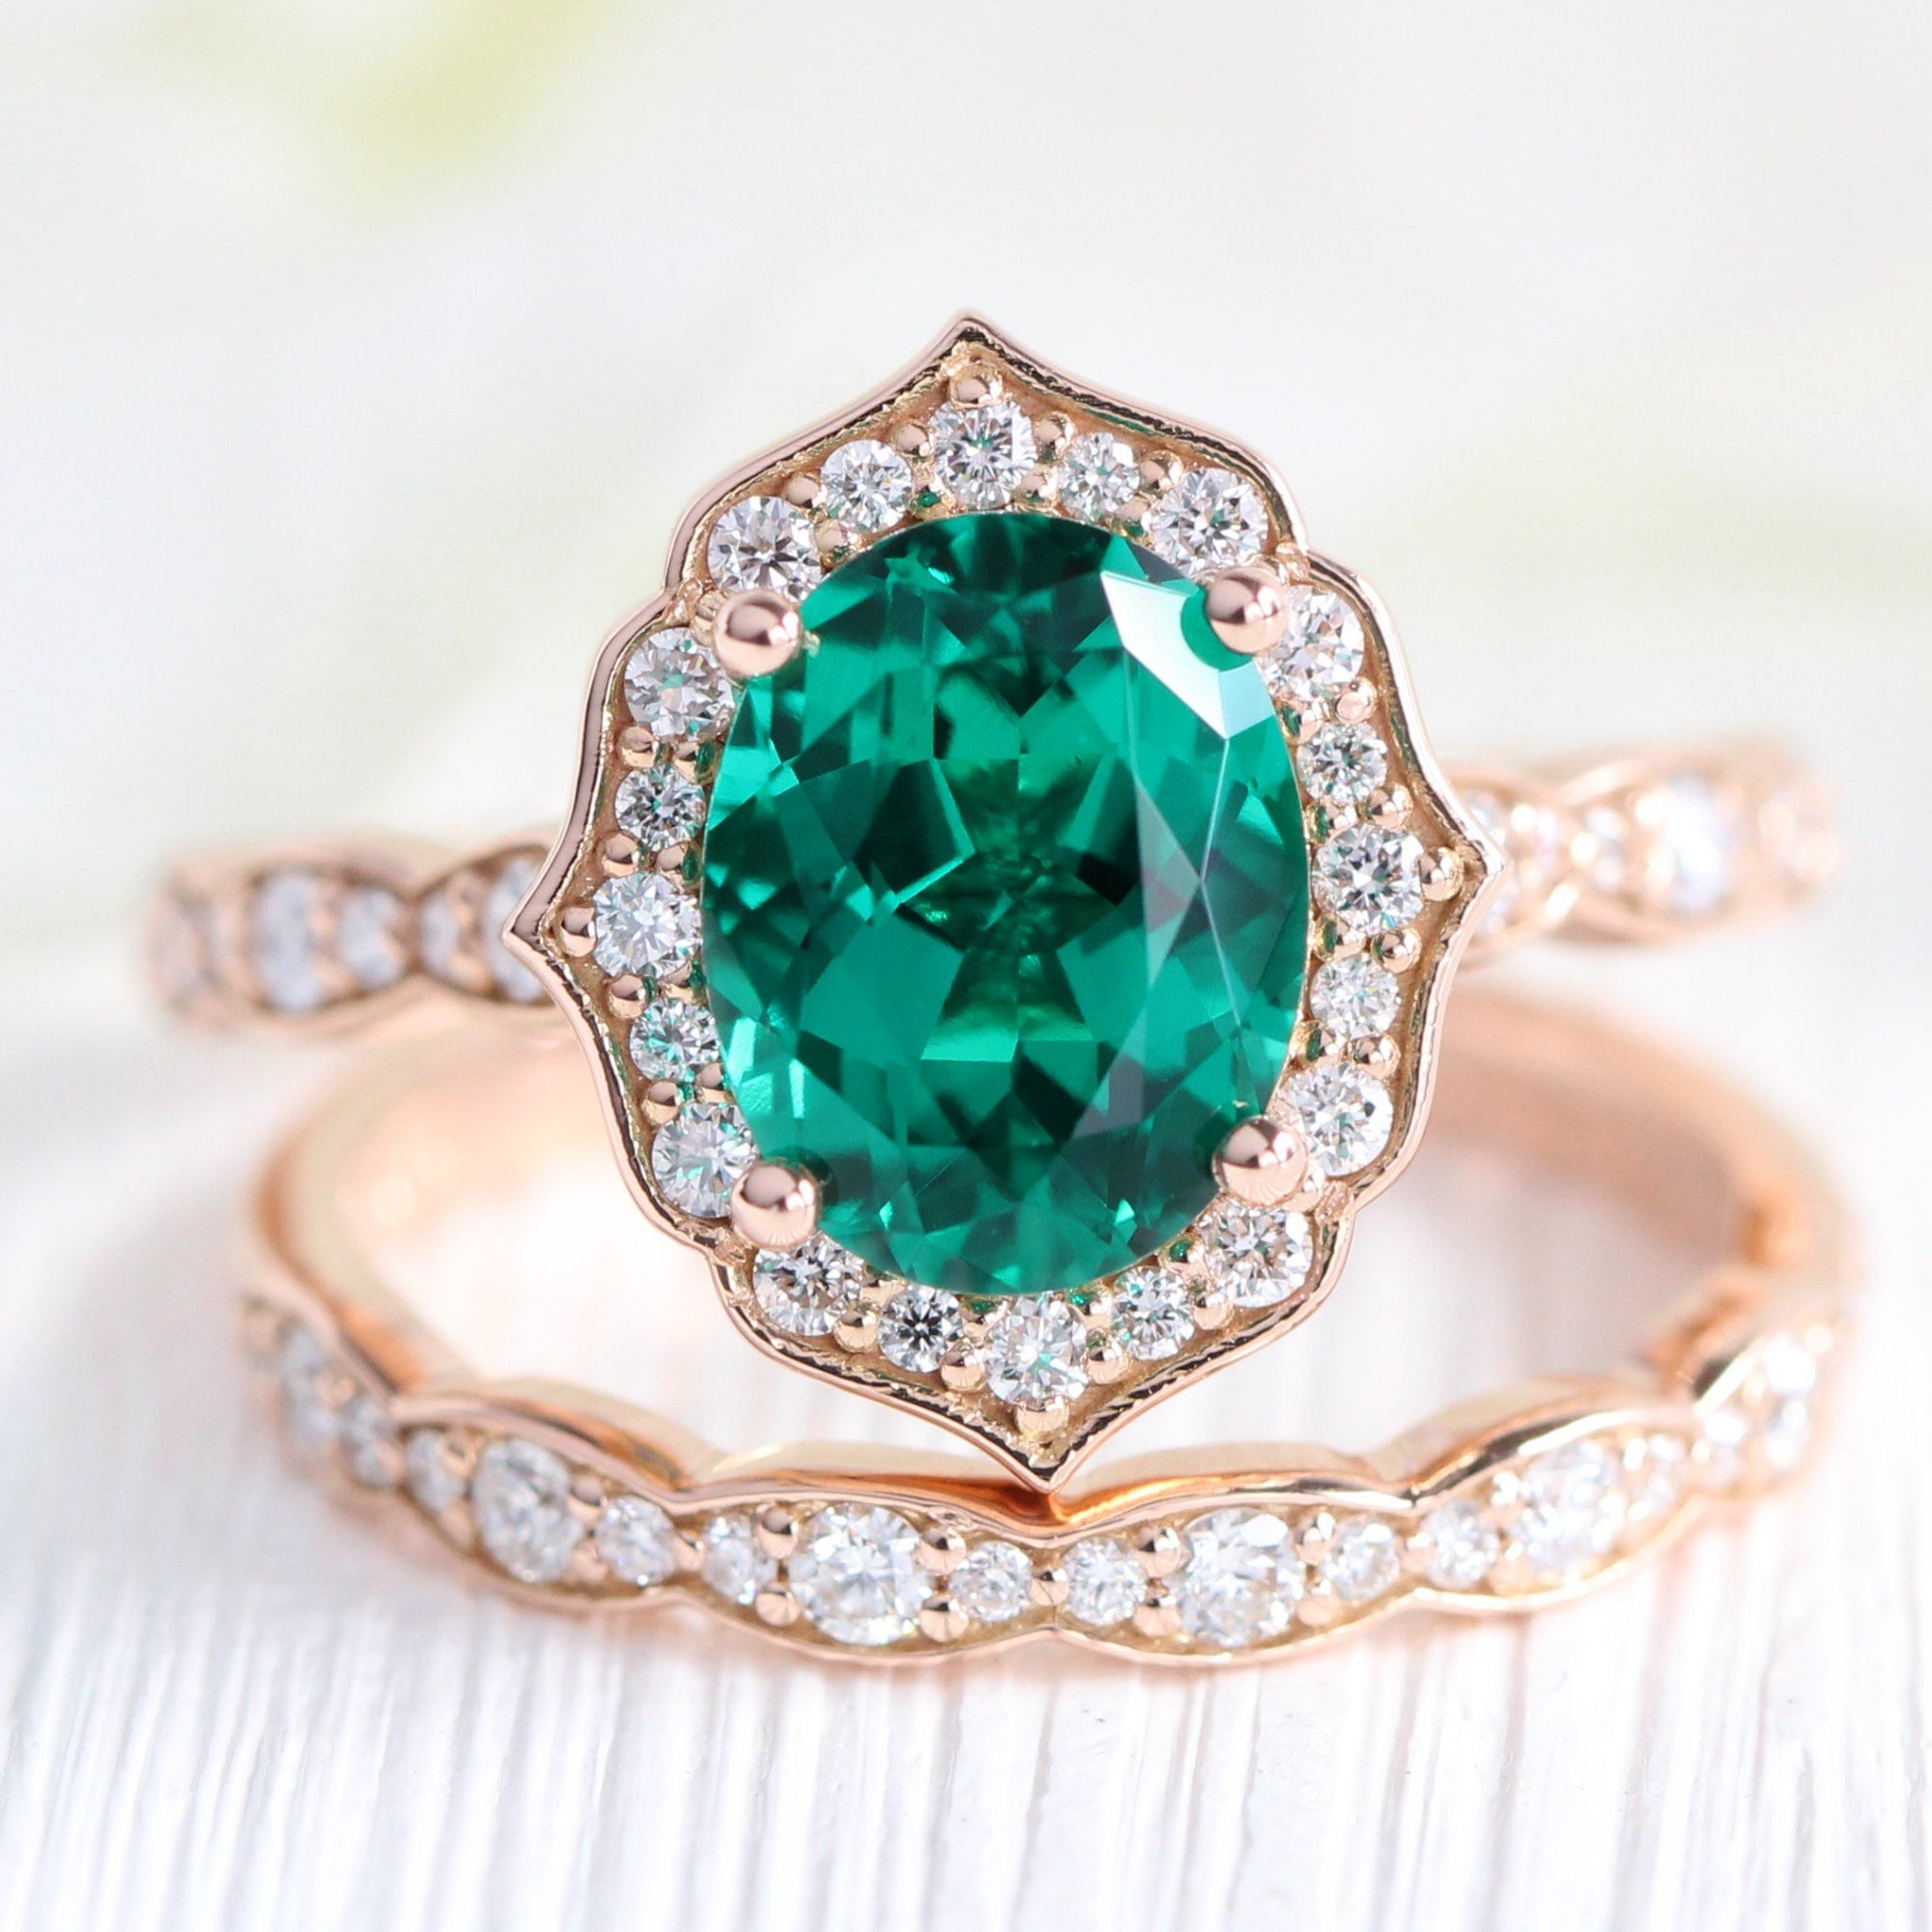 Large oval emerald ring rose gold vintage halo diamond ring la more design jewelry